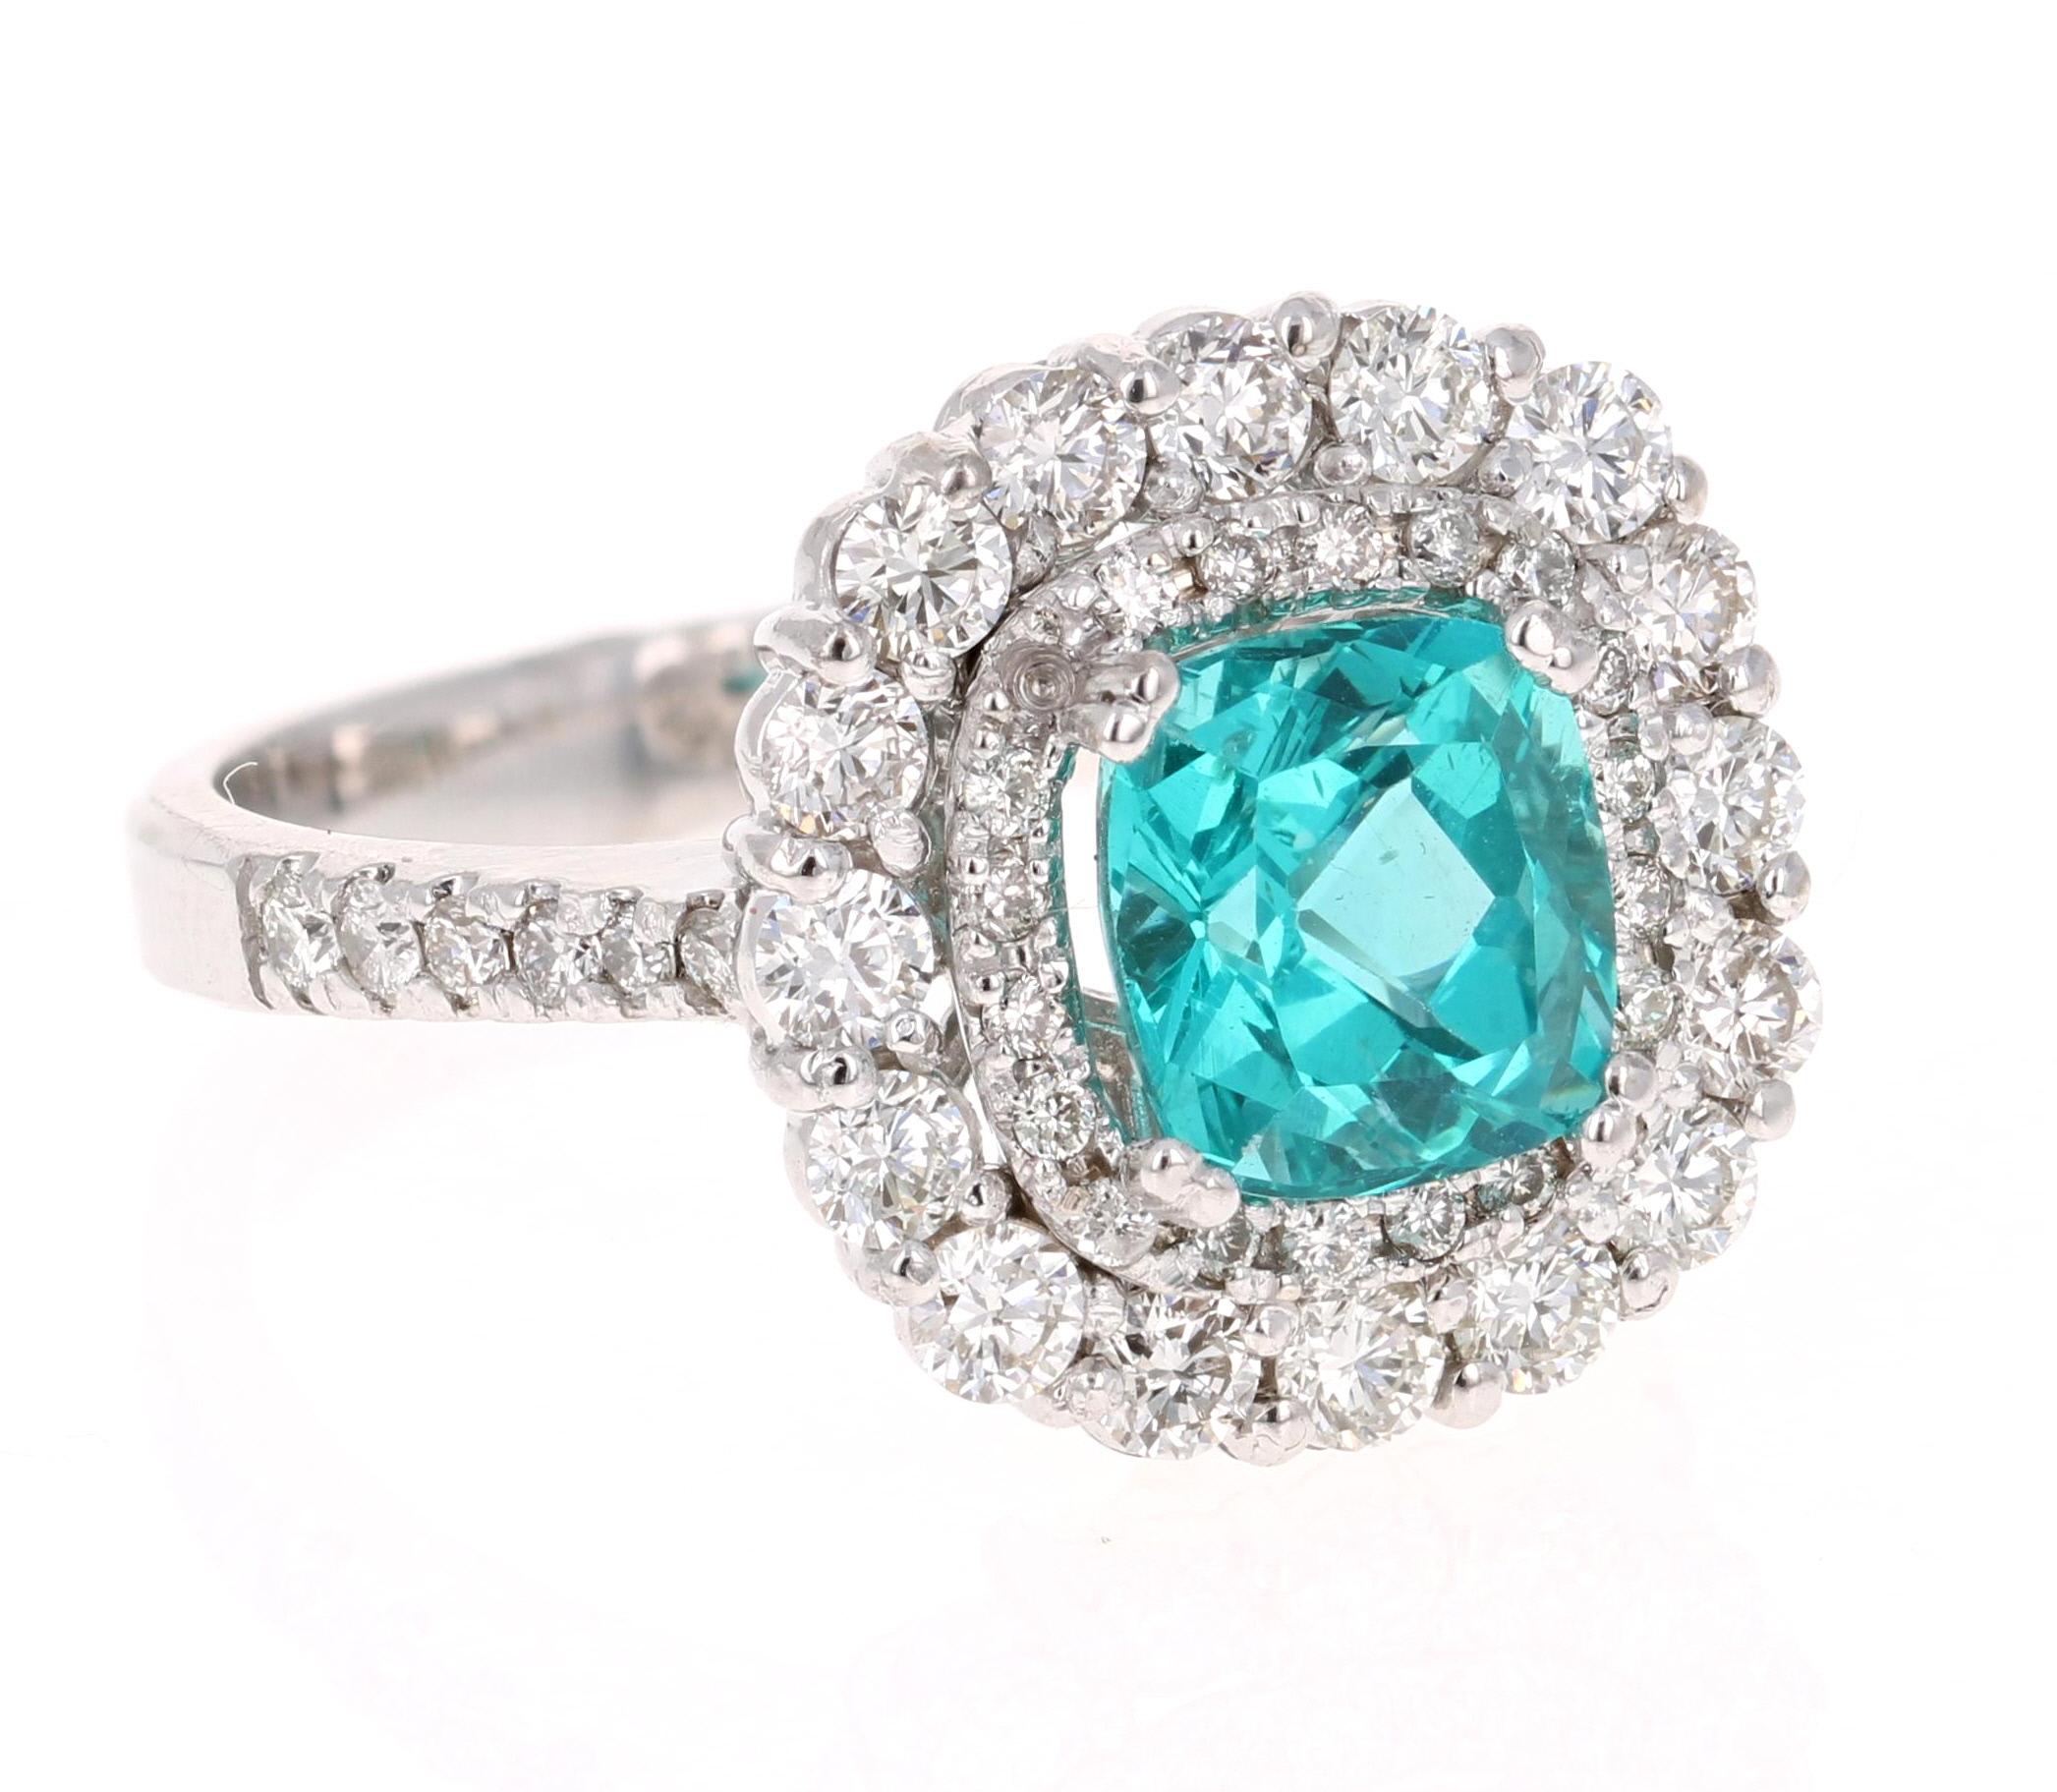 Gorgeous Double Halo Apatite and Diamond Ring.  
This ring has a 2.34 carat Cushion Cut Apatite in the center of the ring and is surrounded by a double halo of 48 Round Cut Diamonds that weigh 1.17 carat (Clarity: VS2, Color: H).  The total carat